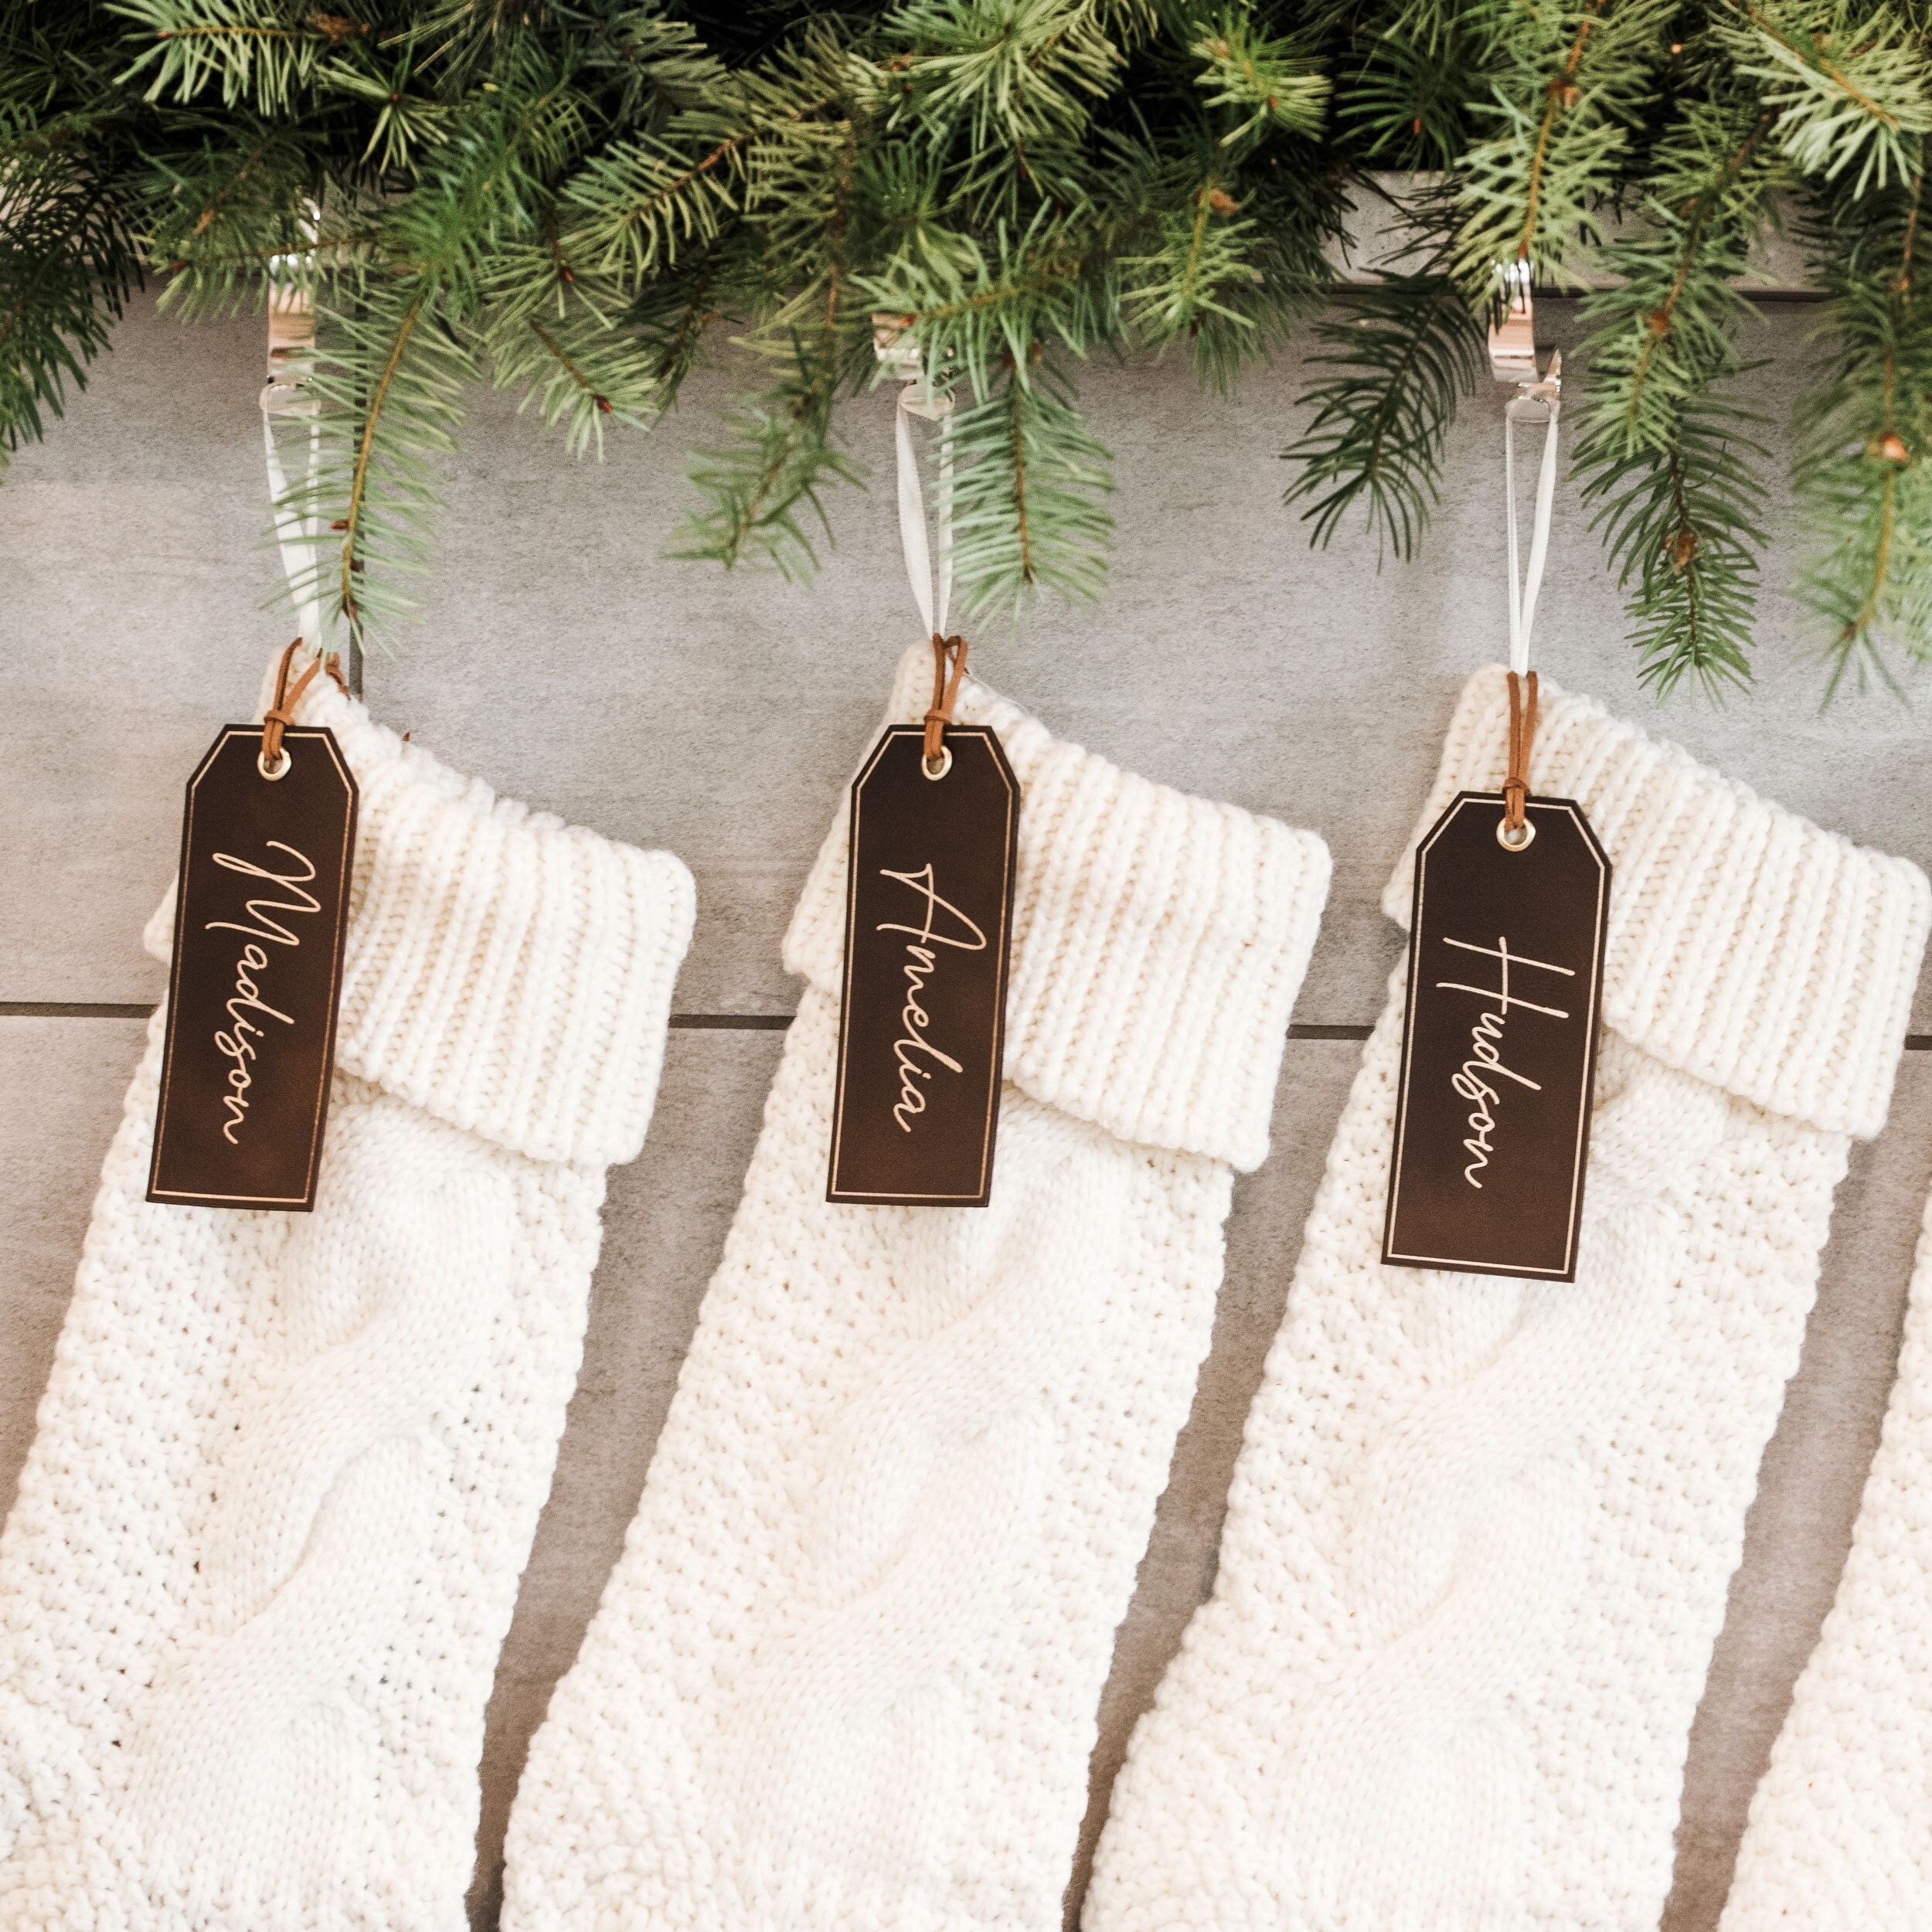 Personalized Stocking Name Tag – Hickory Hollow Designs